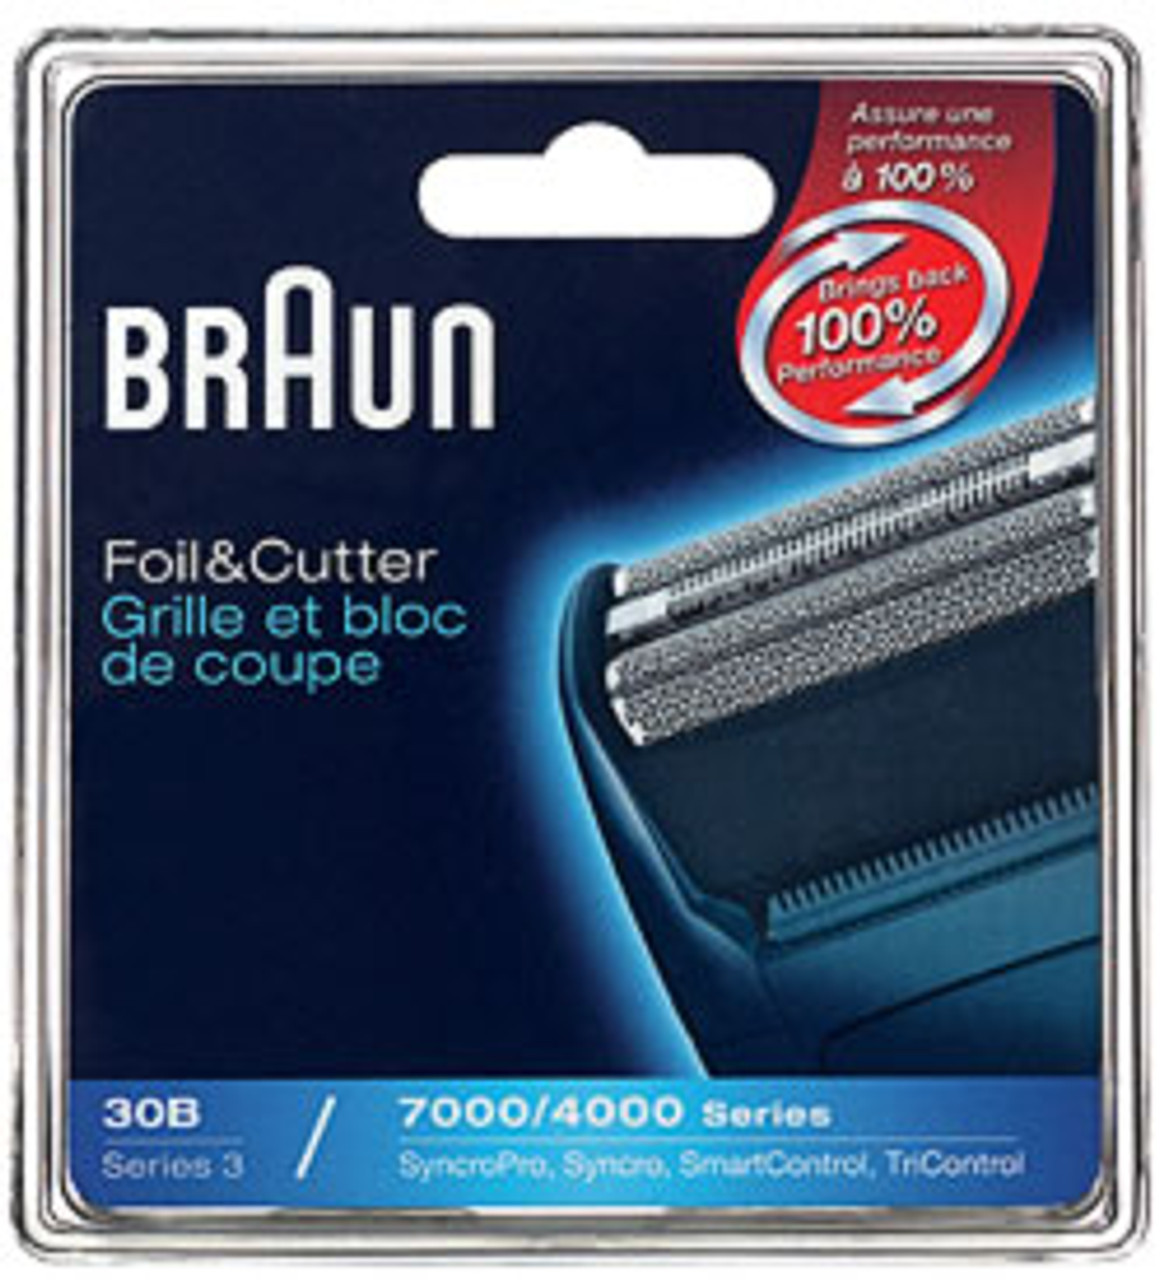 Braun 30B Foil& Cutter high performance parts for 7000/4000 Series Shavers  Razor (Old 310 330 340 , 4775 4835 4875 5746 7630) - AliExpress